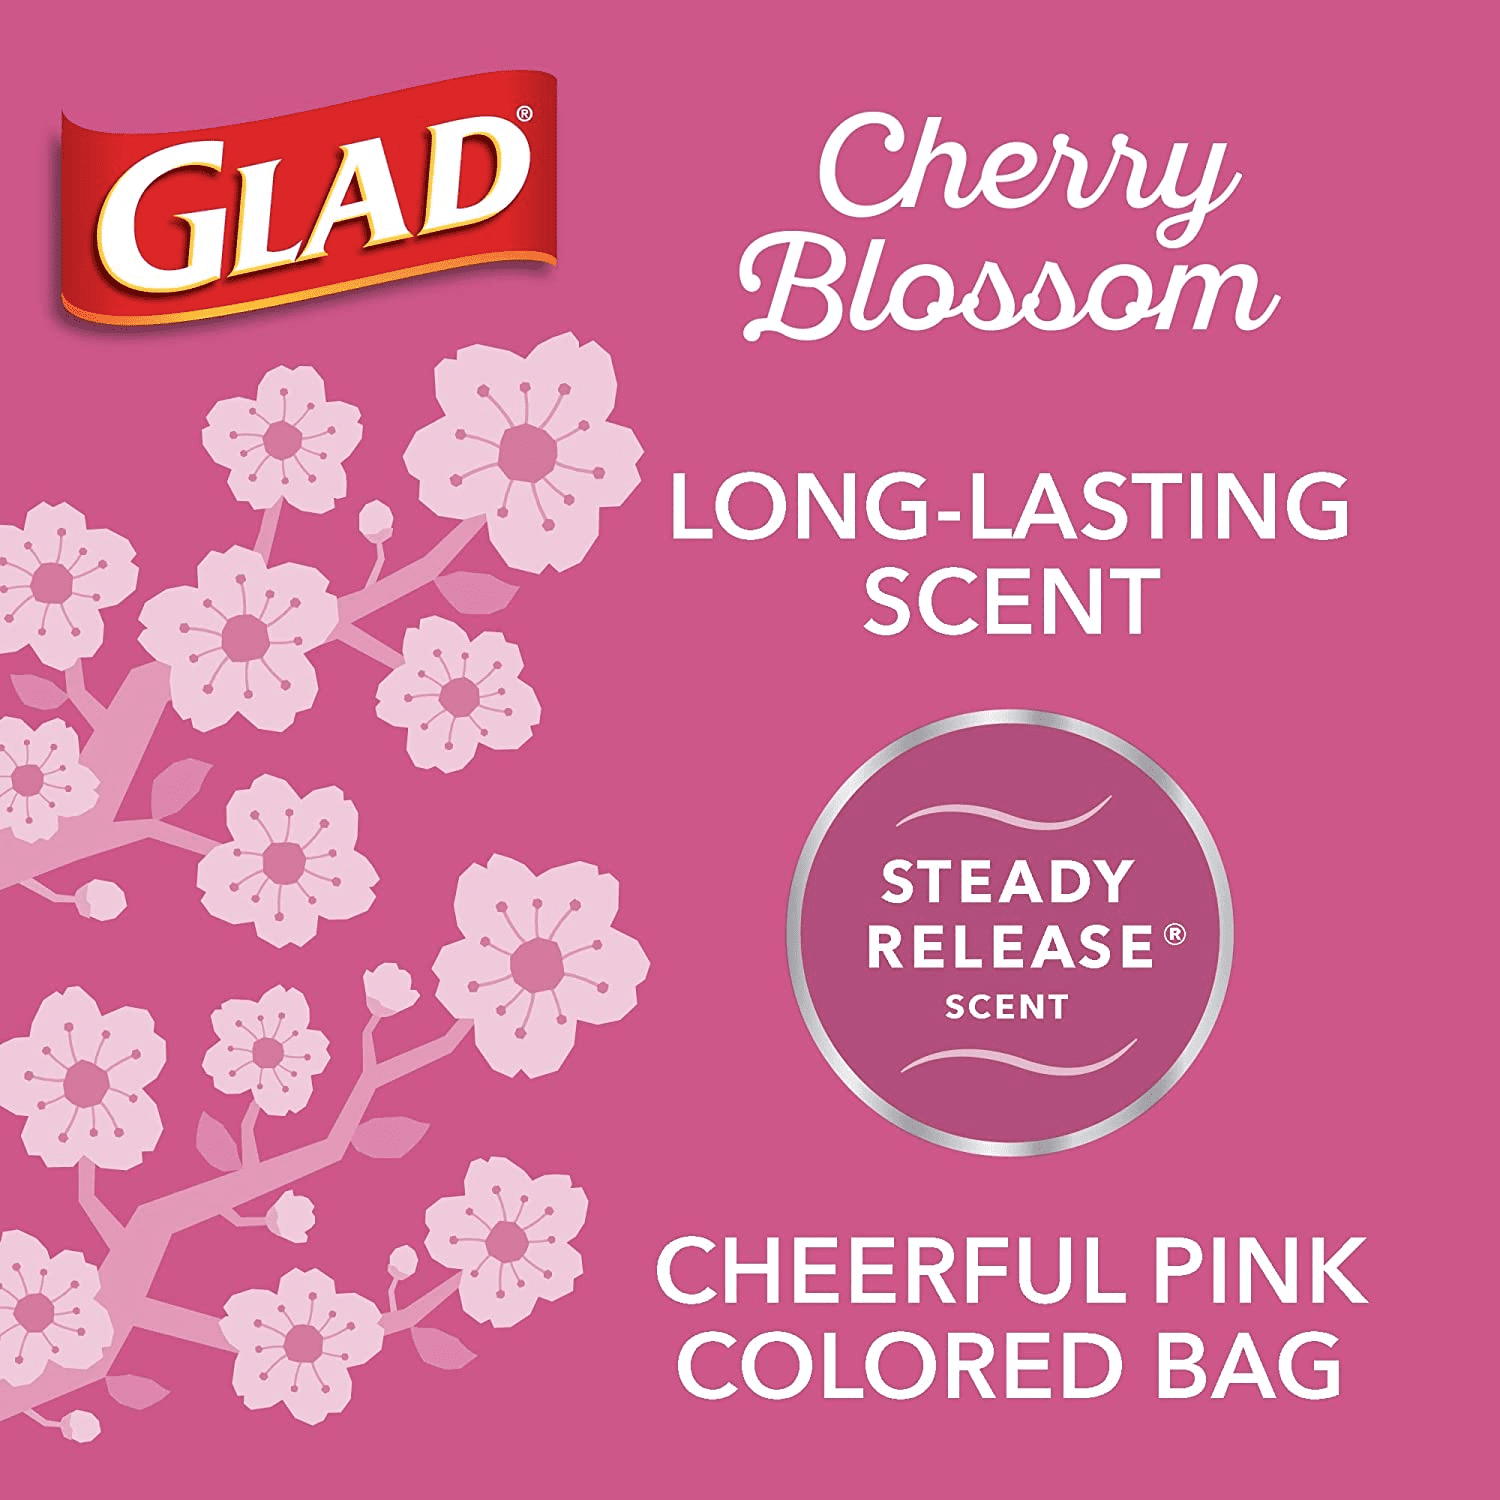 Introducing the newest Glad ForceFlexPlus Cherry Blossom scent